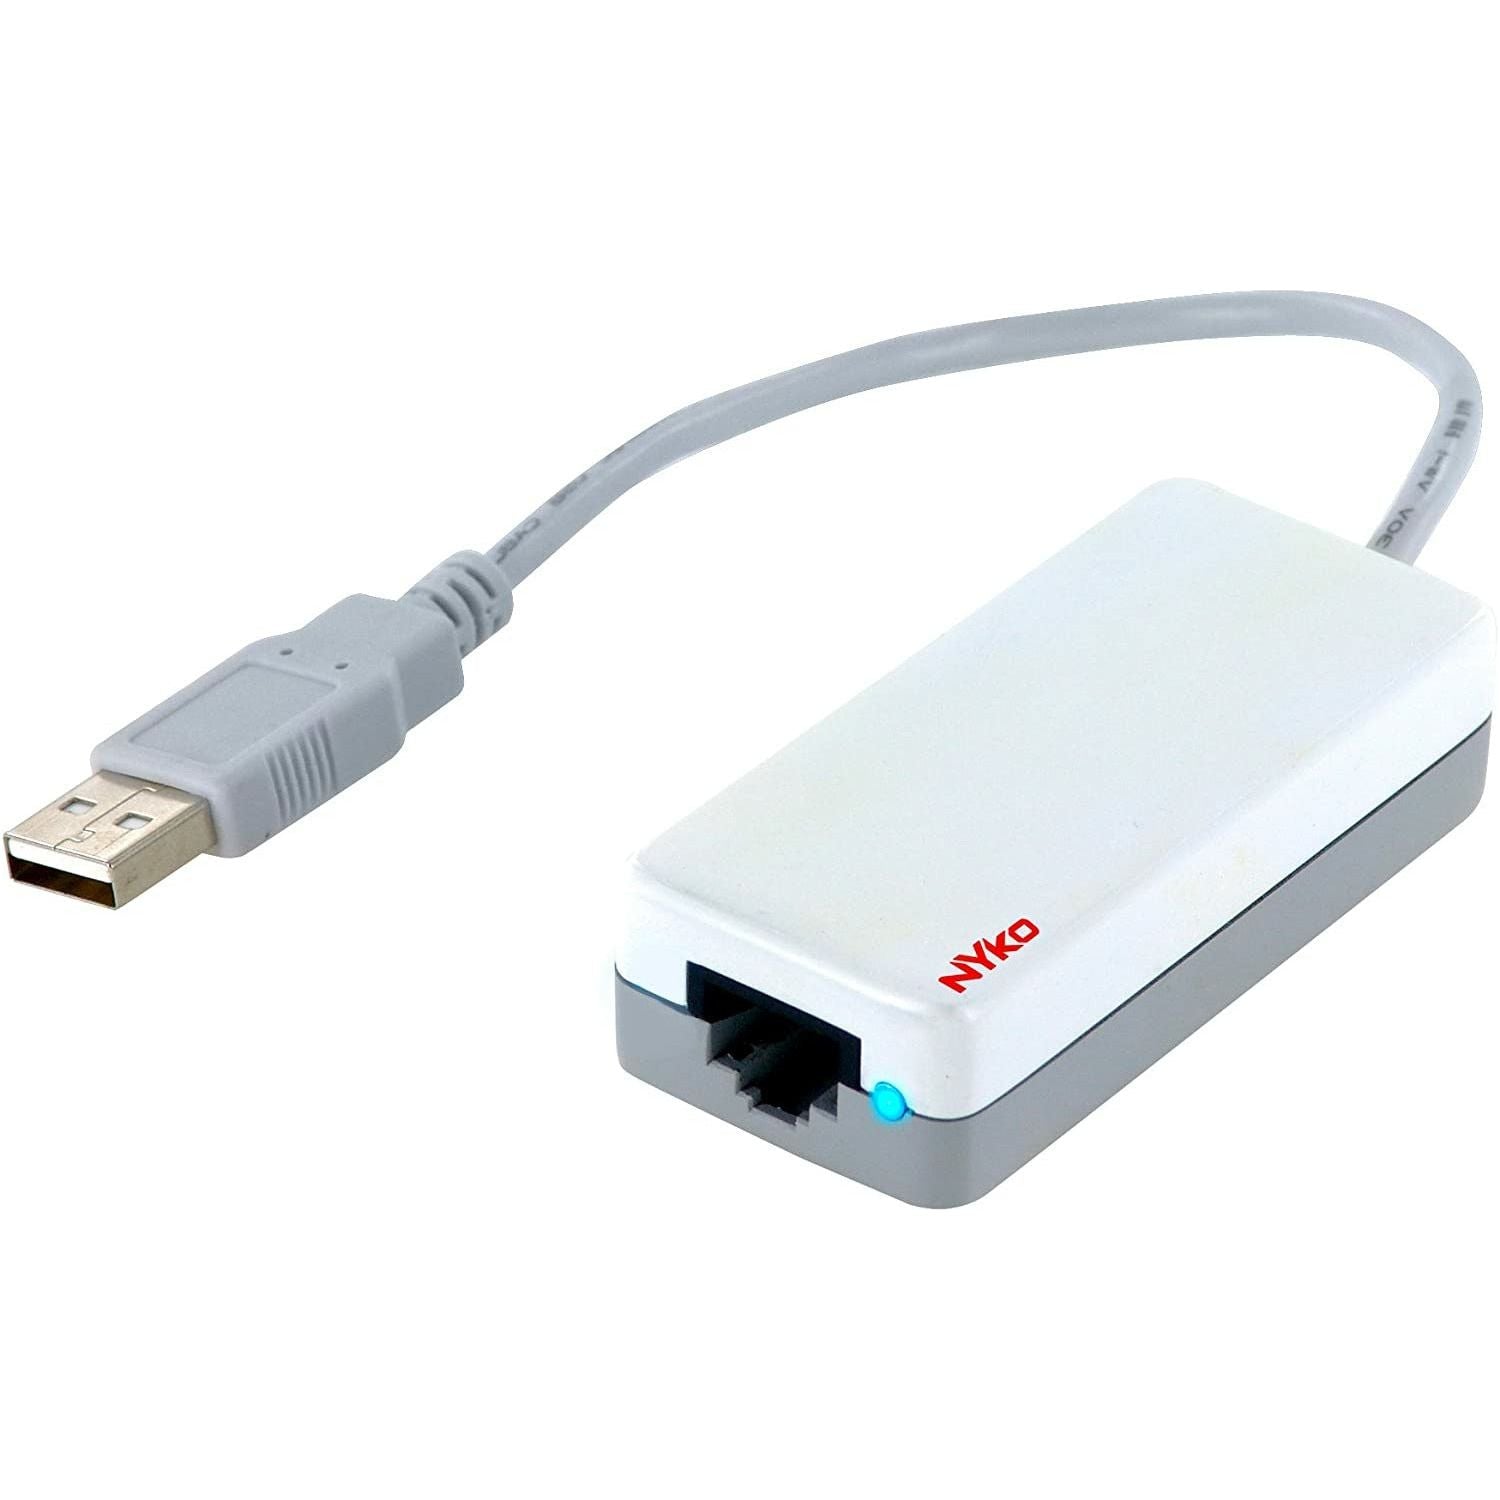 Nyko Net Connect USB Network Adapter for Wii